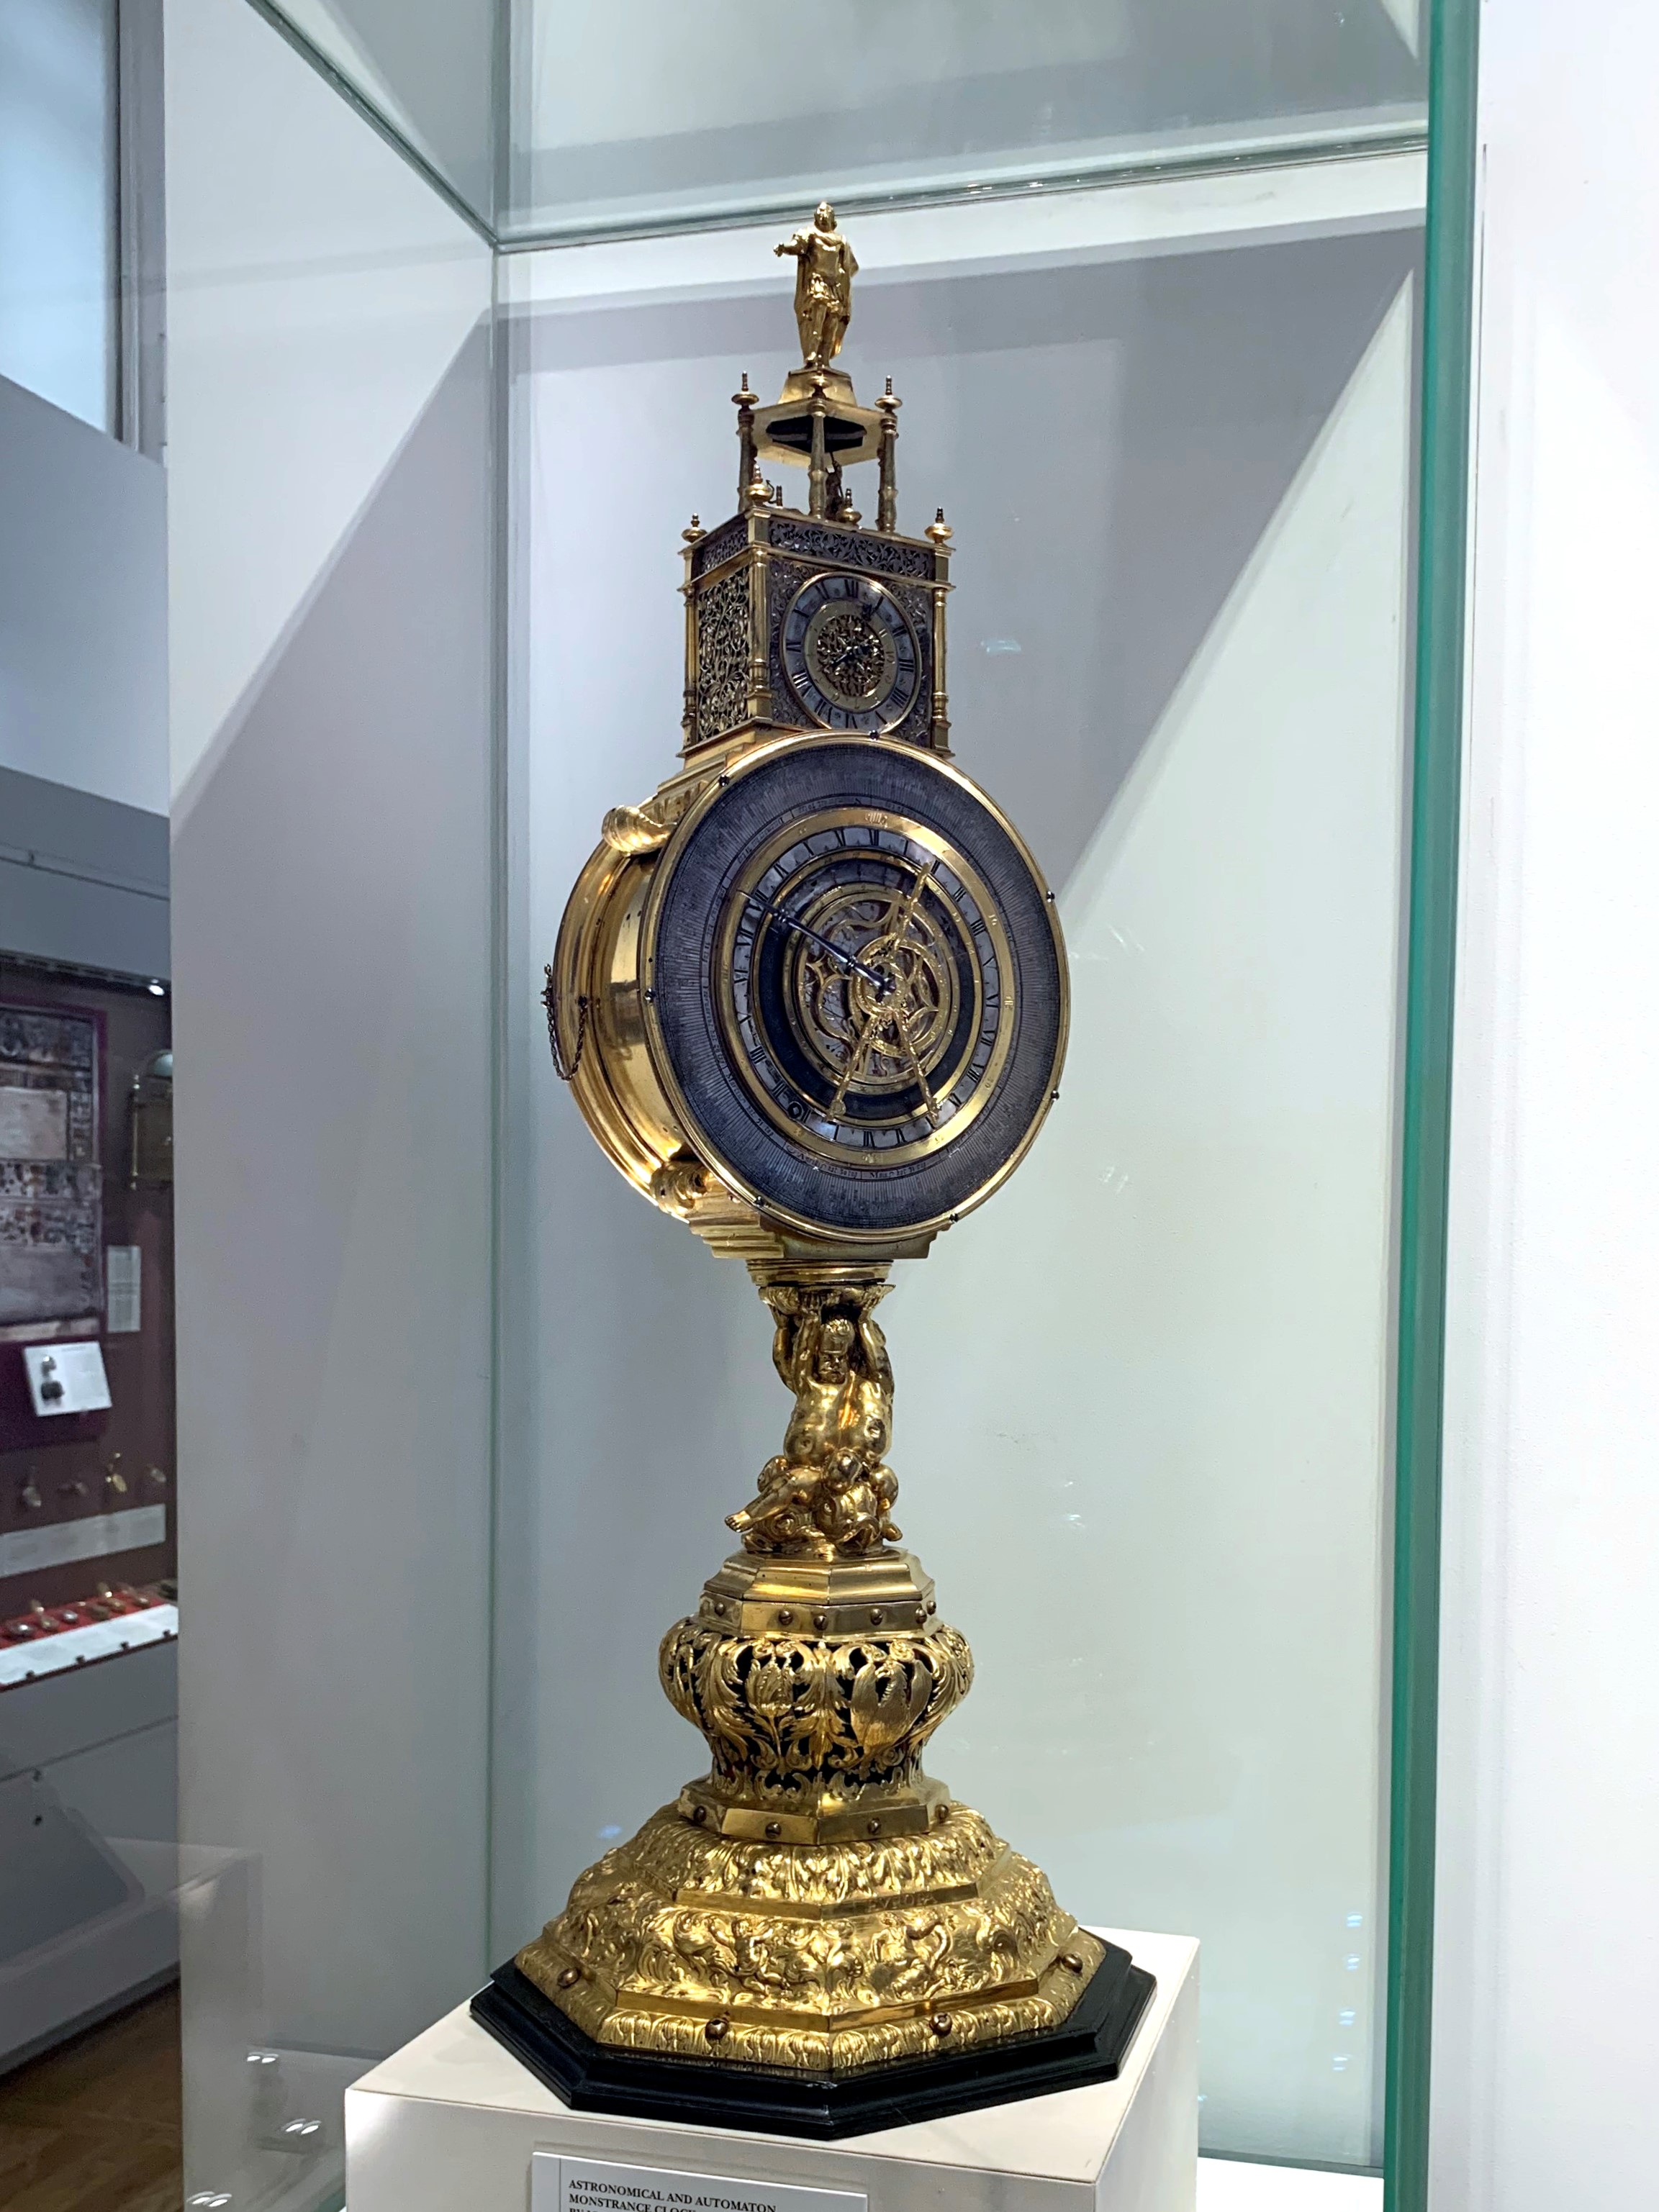 Astronomical and Automaton Monstrance Clock